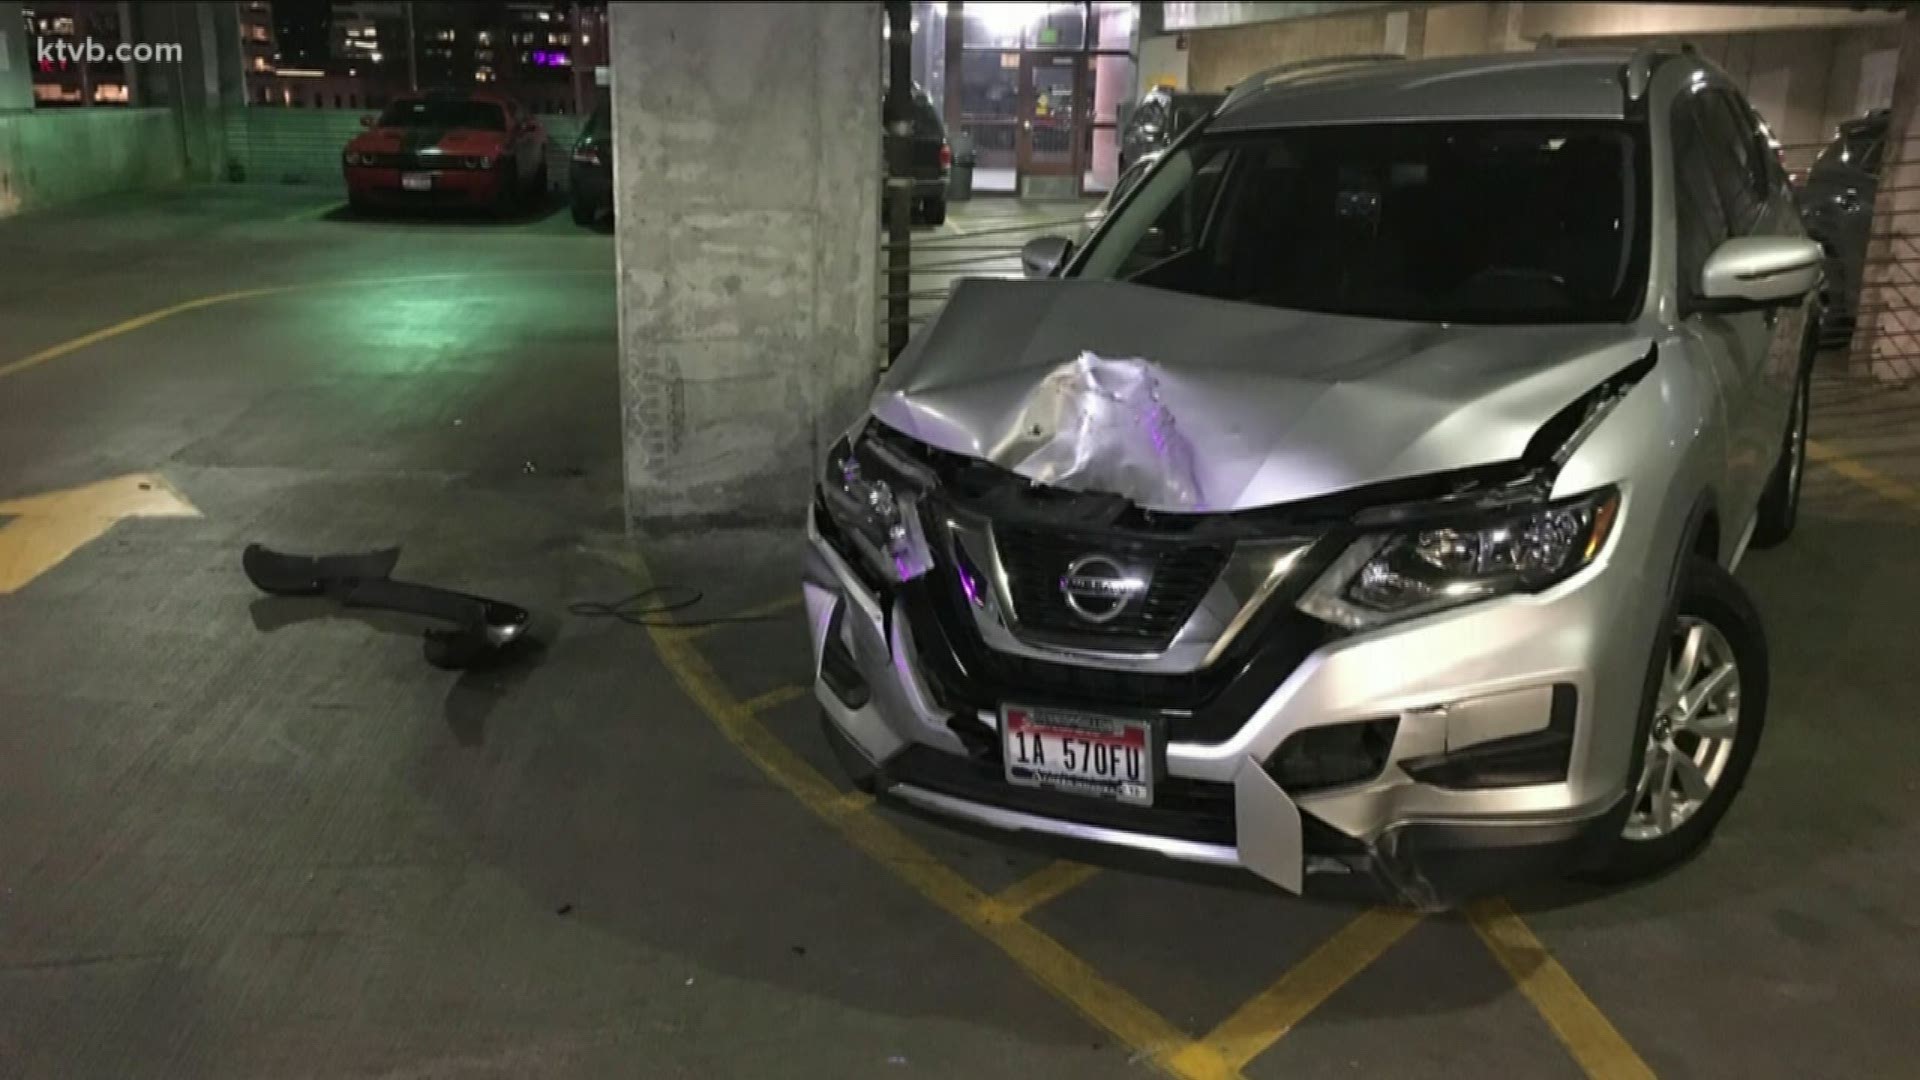 Plus, we hear from the owner of the truck that was dragged through a downtown Boise parking garage by a Mustang on Valentine's Day.